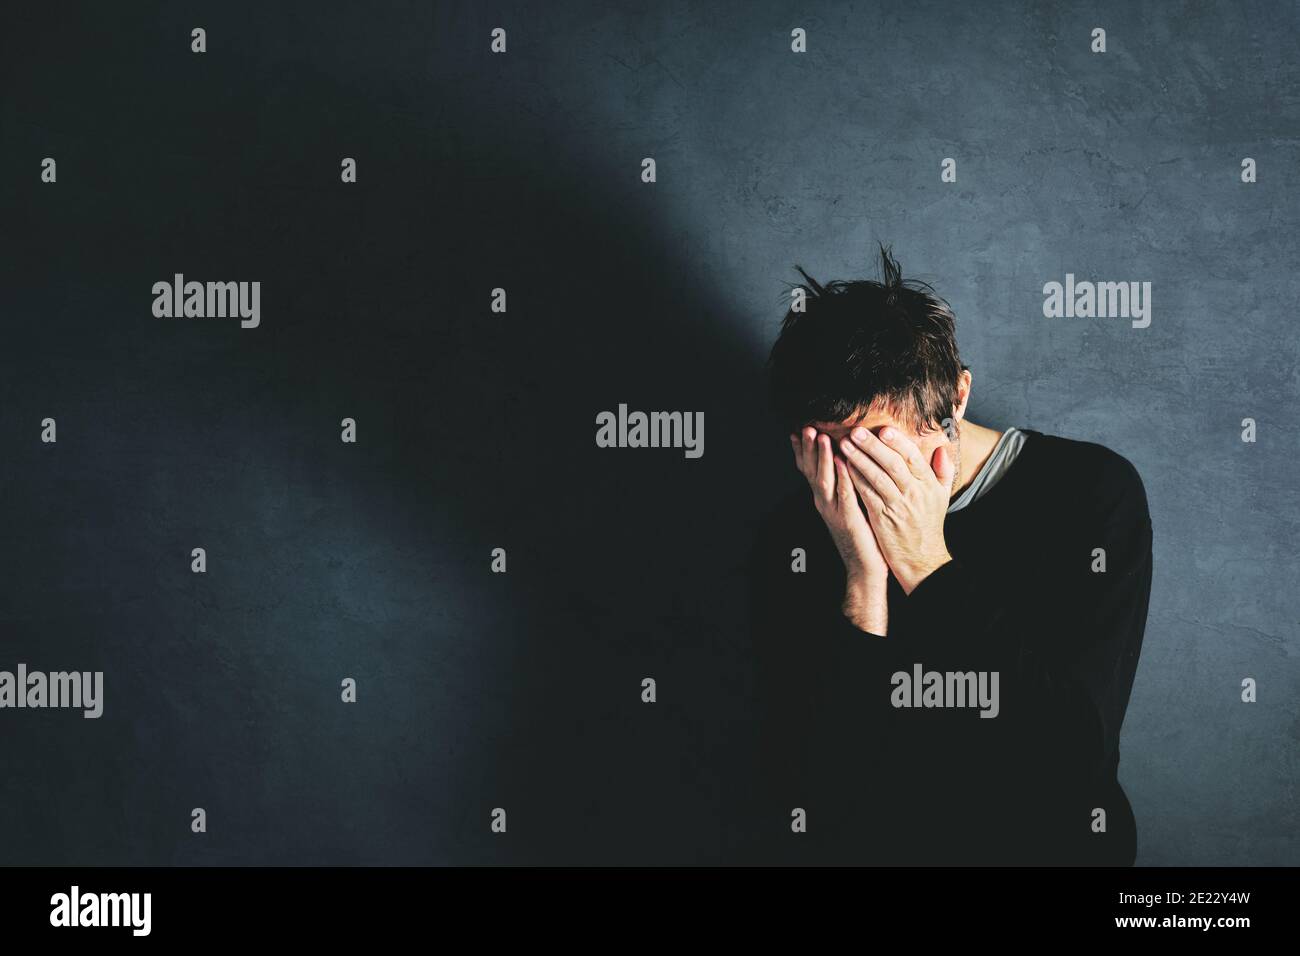 Grief concept, man coping with the loss in state of emotional distress, overwhelmed and helpless. Adult male covering face with his hands. Stock Photo